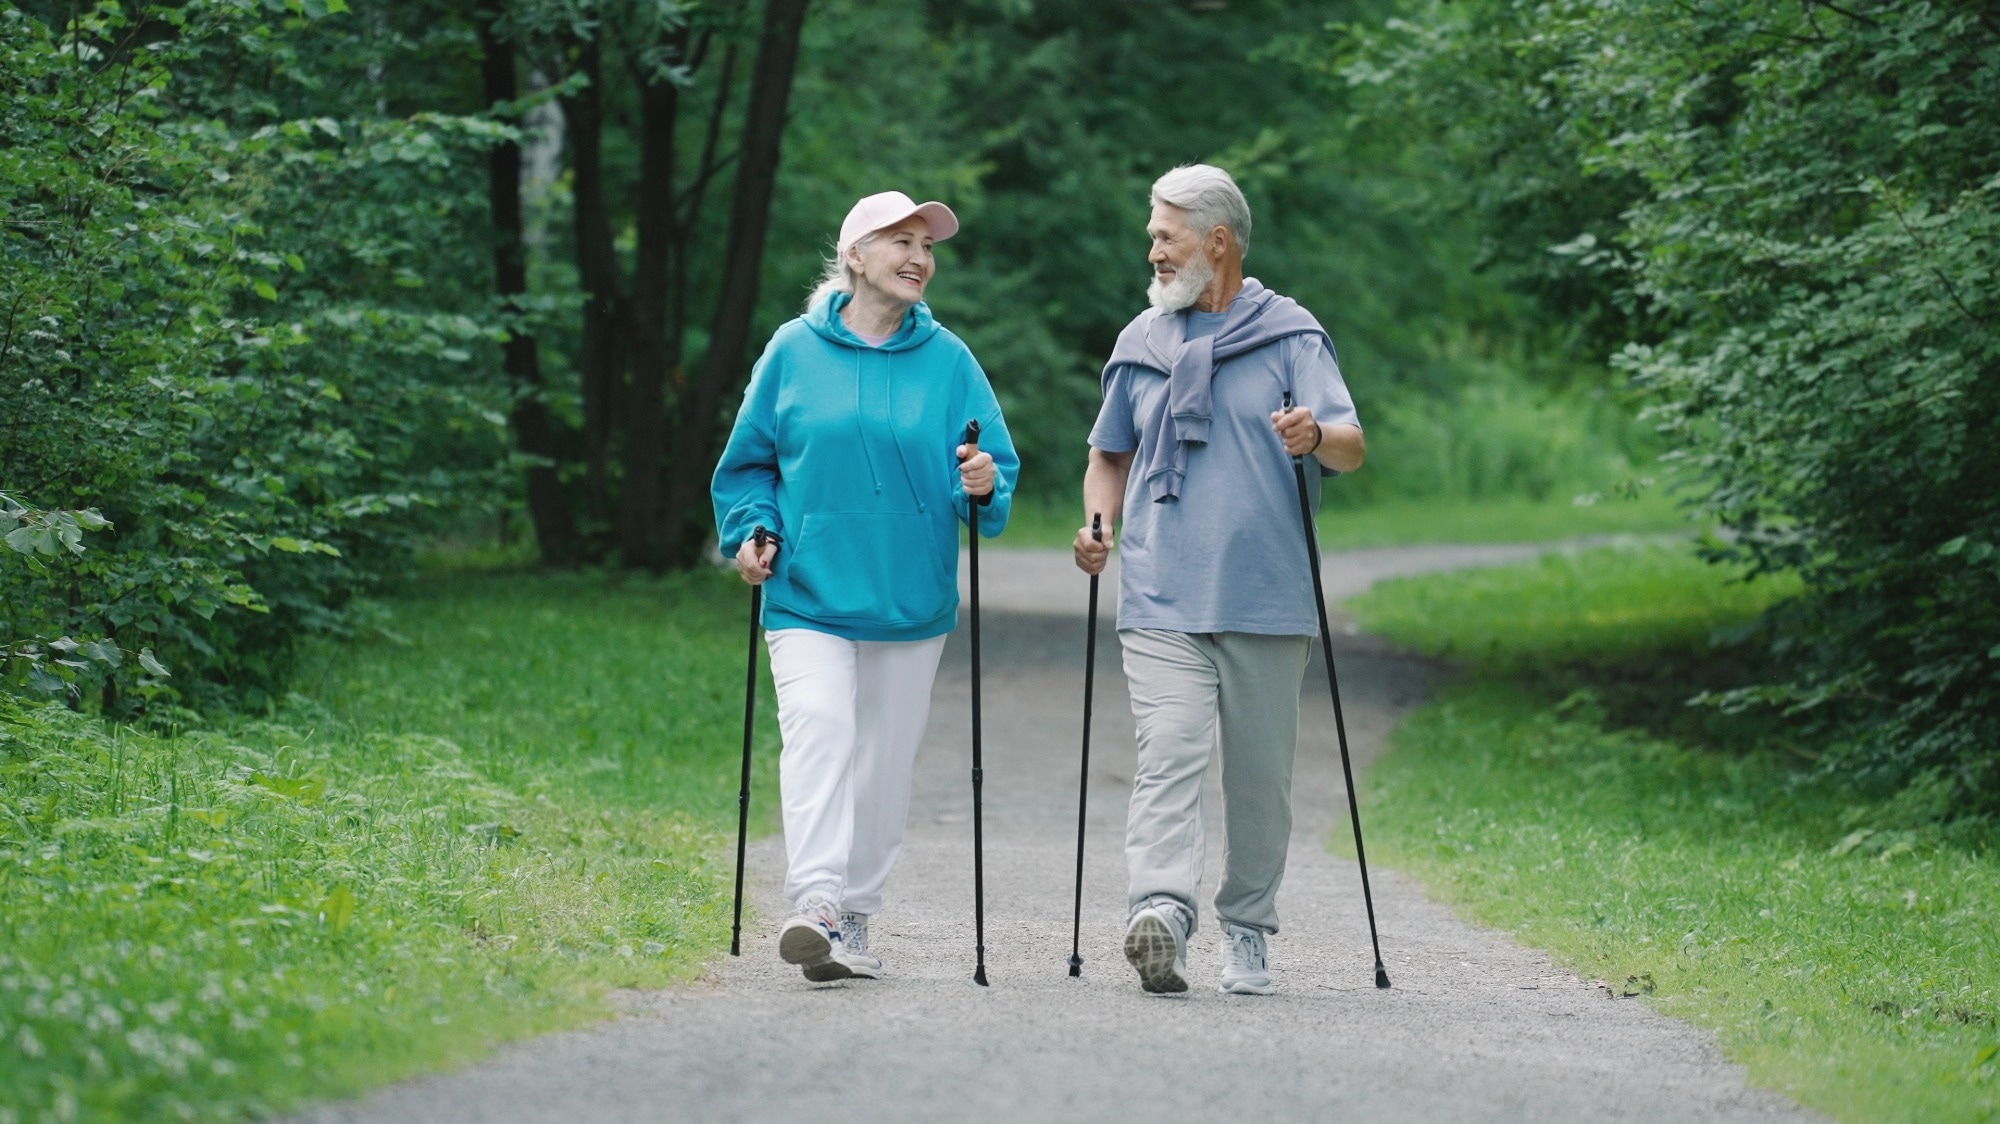 Study: Association between changes in habitual stepping activity and cognition in older adults. Image Credit: SibRapid / Shutterstock